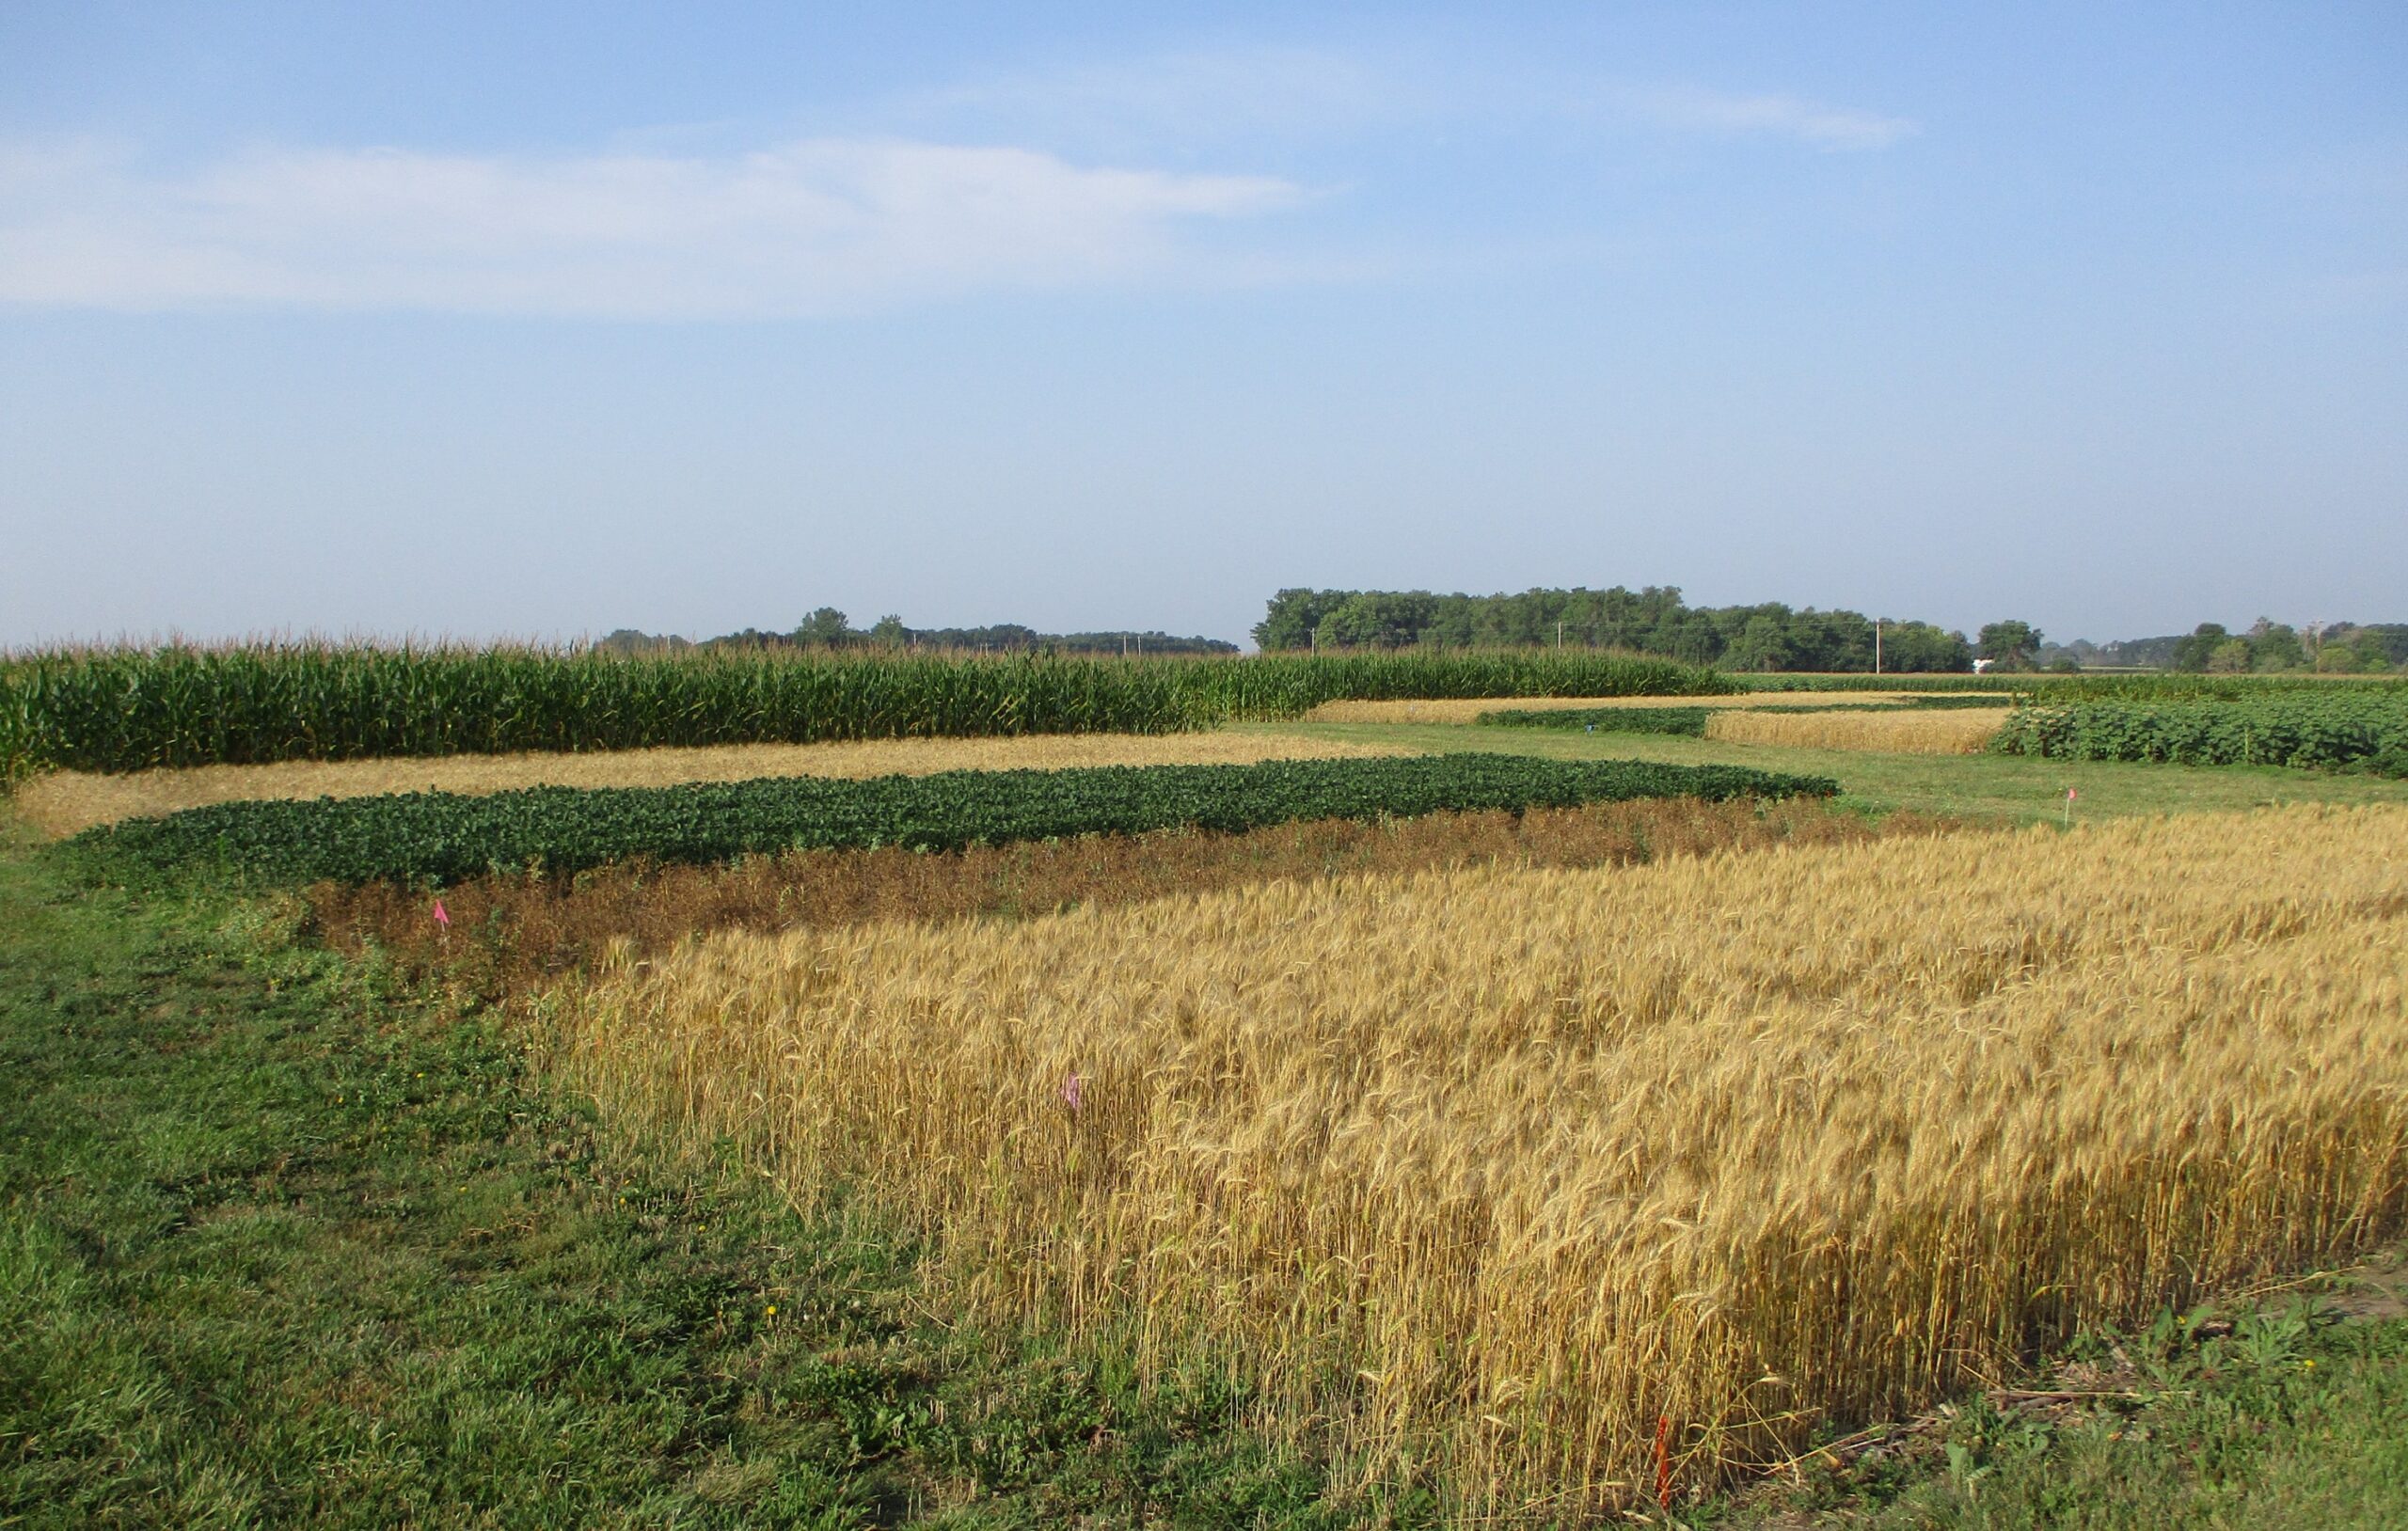 A photo of a field with various crops grown in small plots for research.